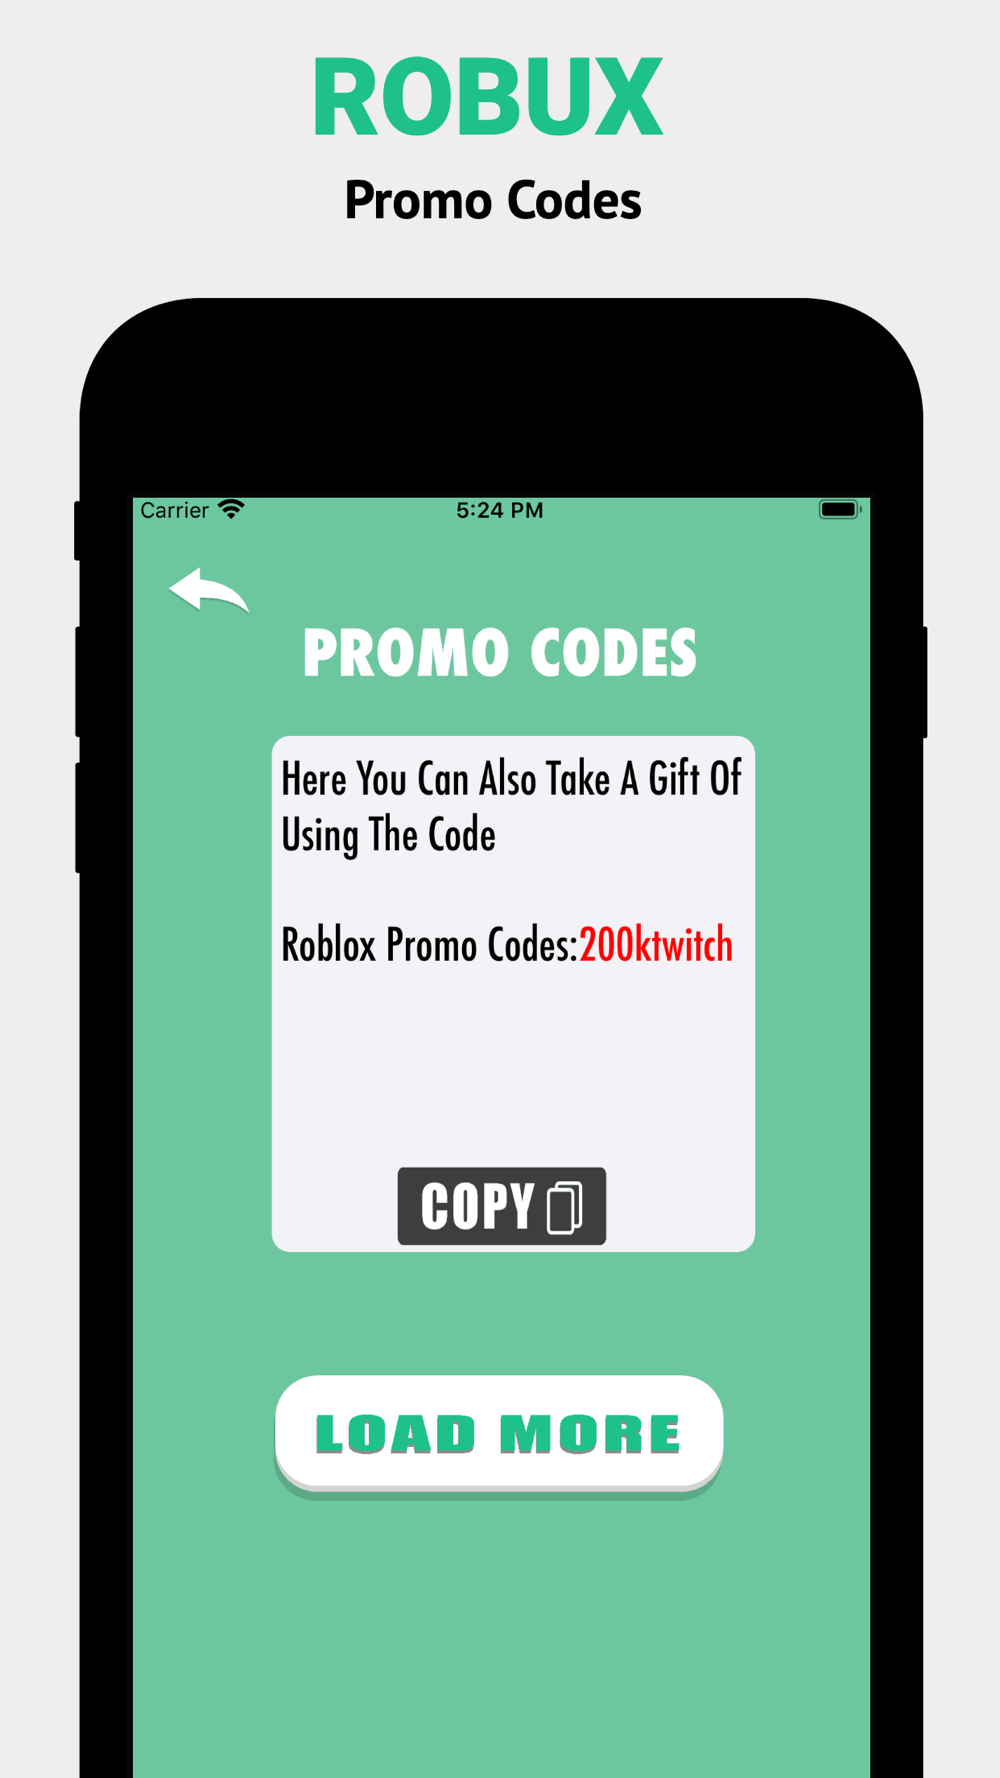 Robux Promo Codes For Roblox Free Download App For Iphone Steprimo Com - robux prtomo code